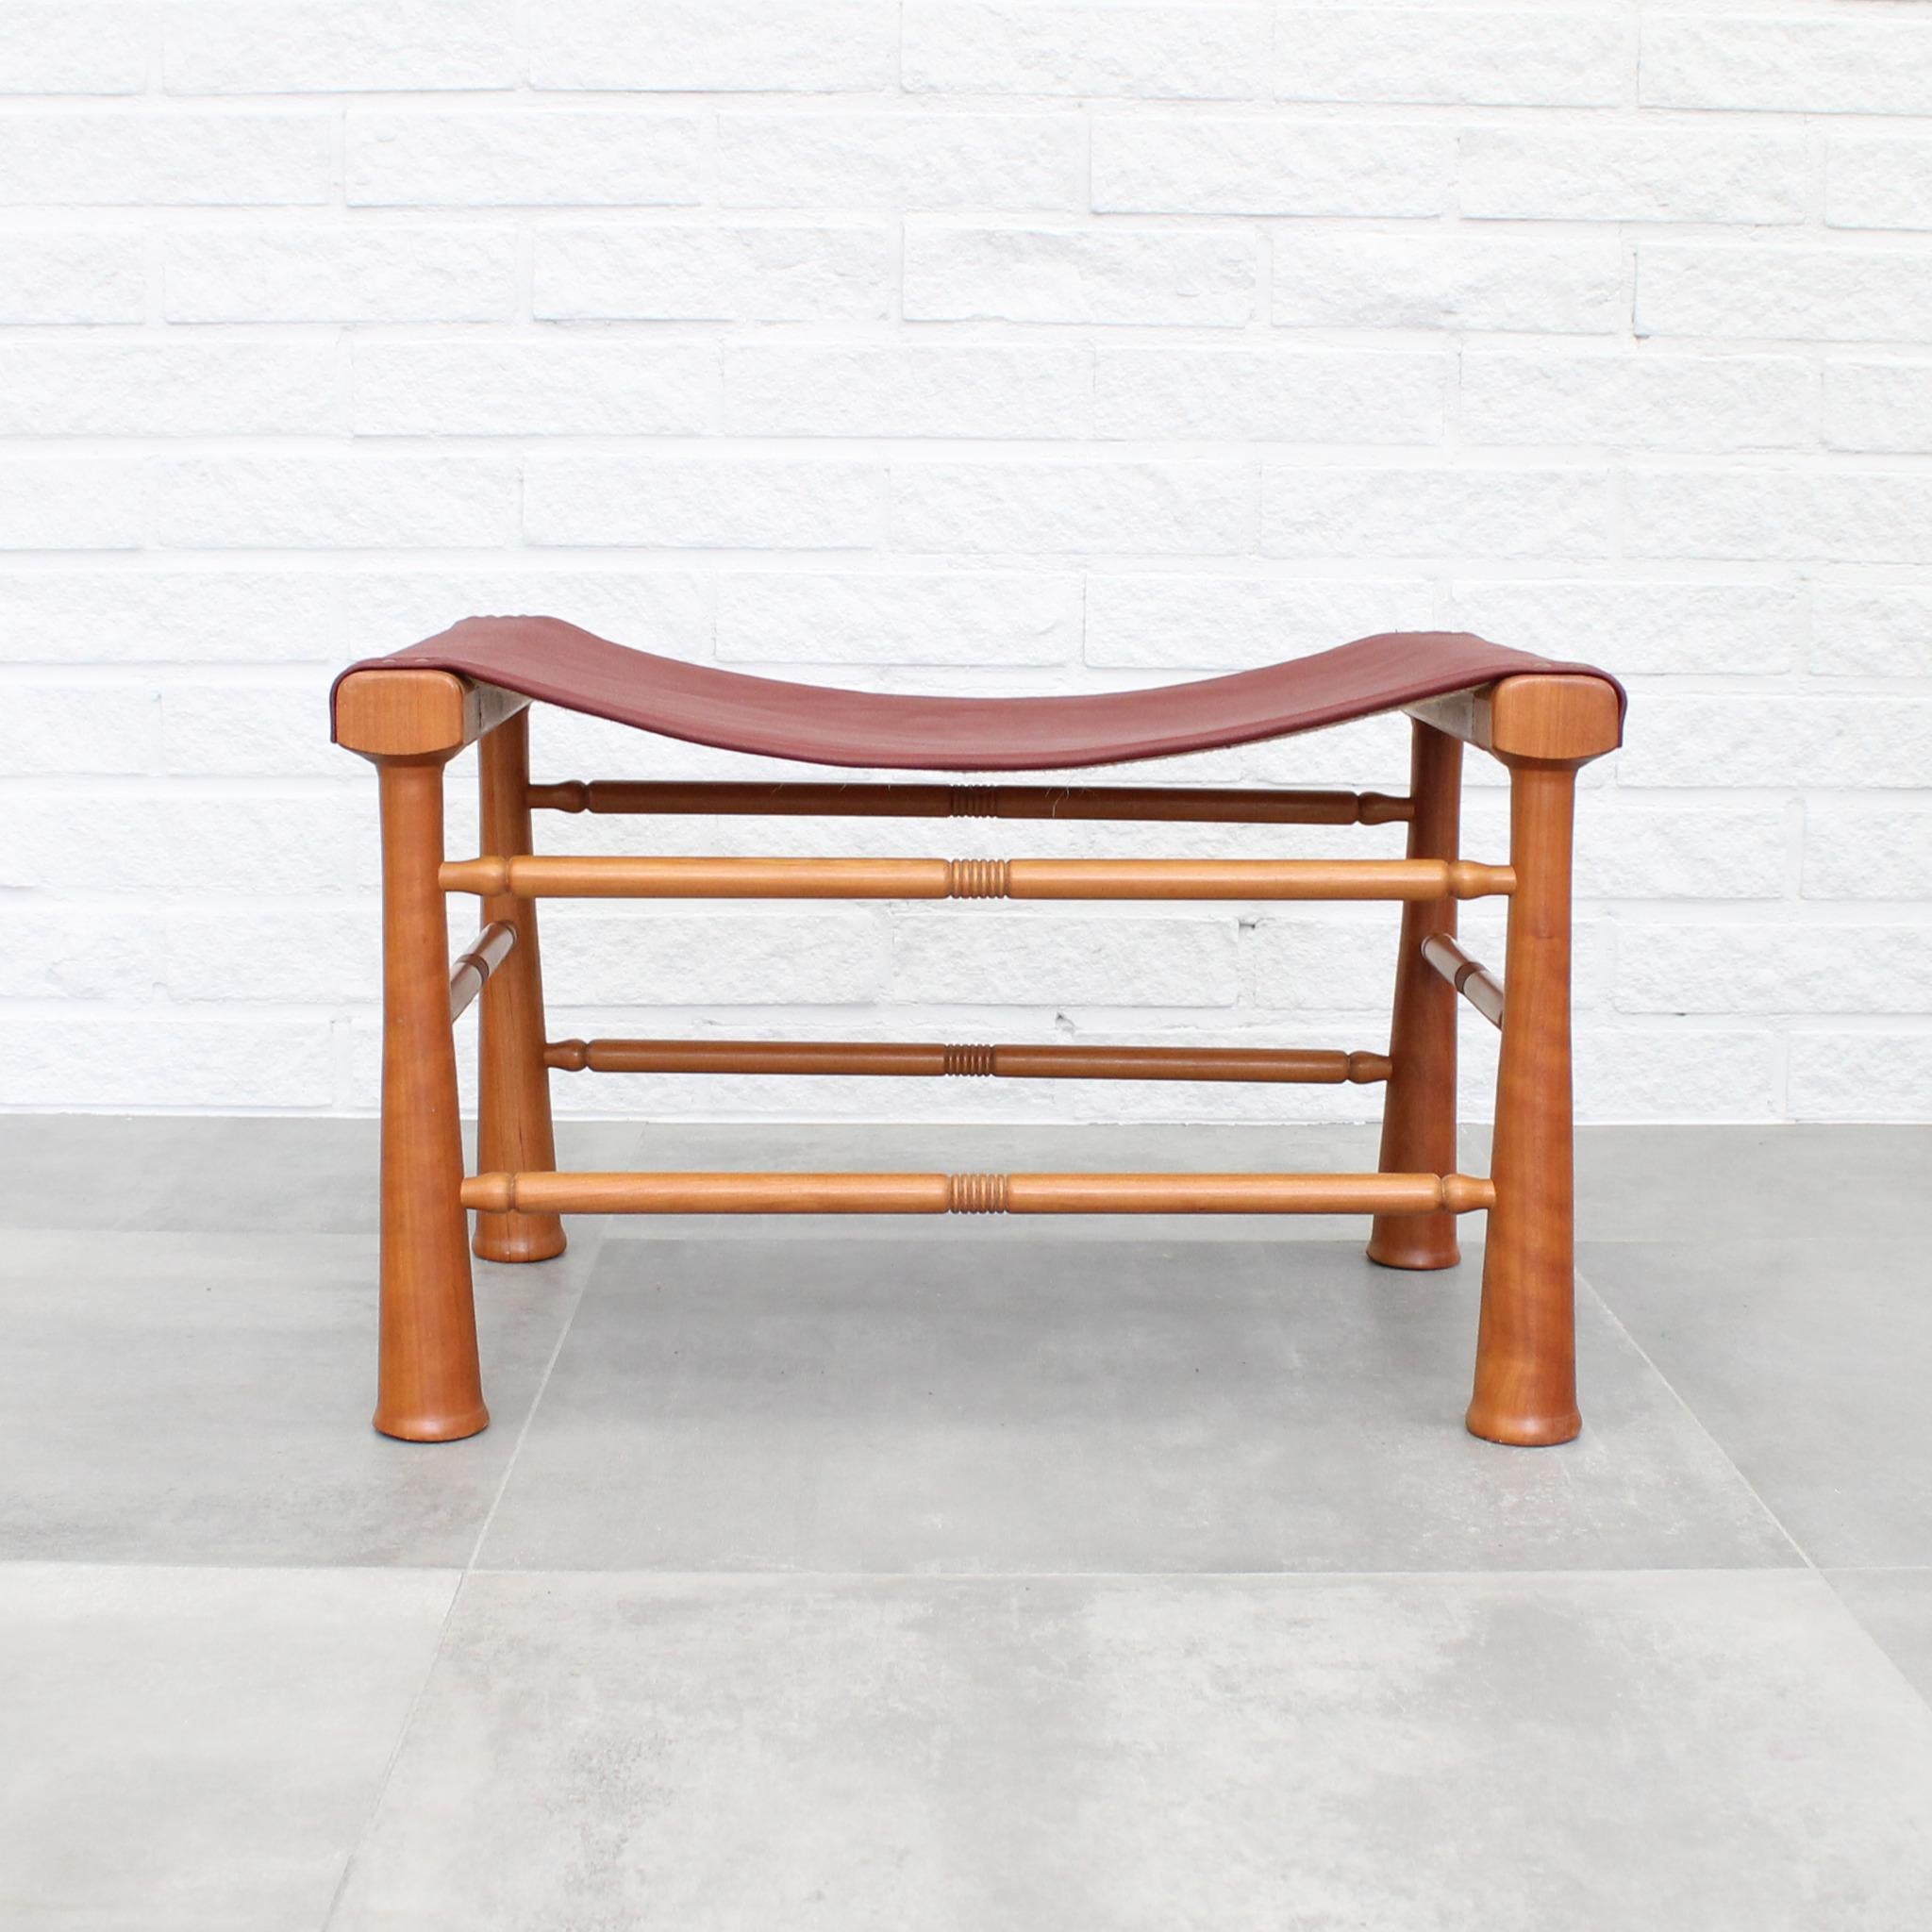 Stool model 972, a 1940 design by Josef Frank for Firma Svenskt Tenn. Crafted from solid mahogany, it features rich red leather upholstery and decorative brass rivets along the sides. This particular model made its debut in a 1940 exhibition with an